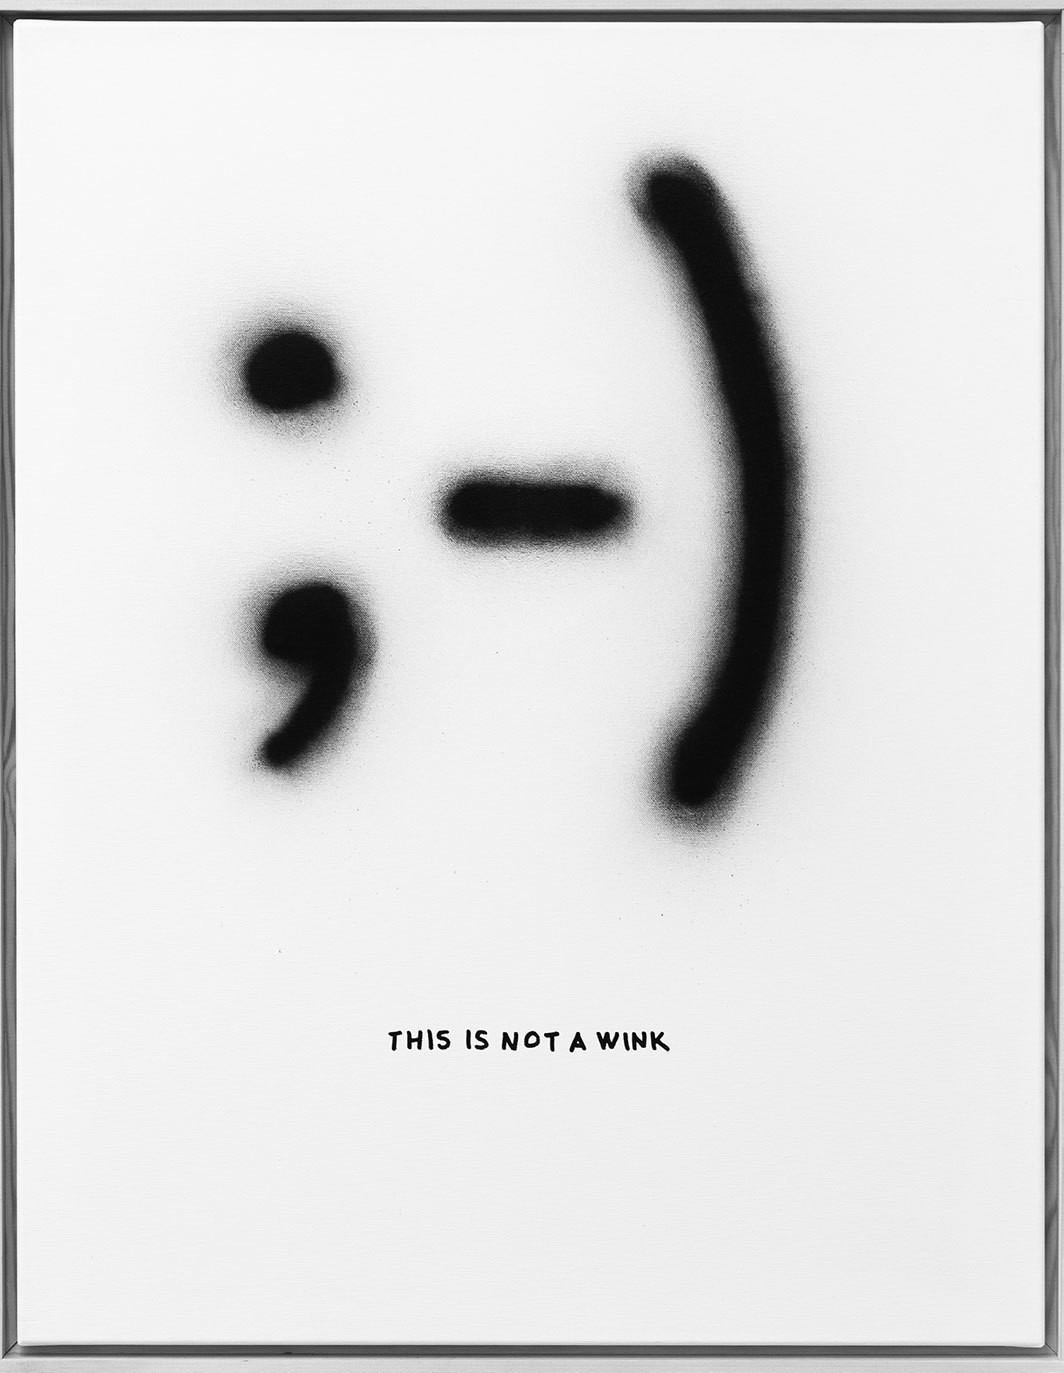 Florian Kuhlmann, This is not a Wink, 2017, spray paint on canvas, 39 3⁄8 × 27 5⁄8".